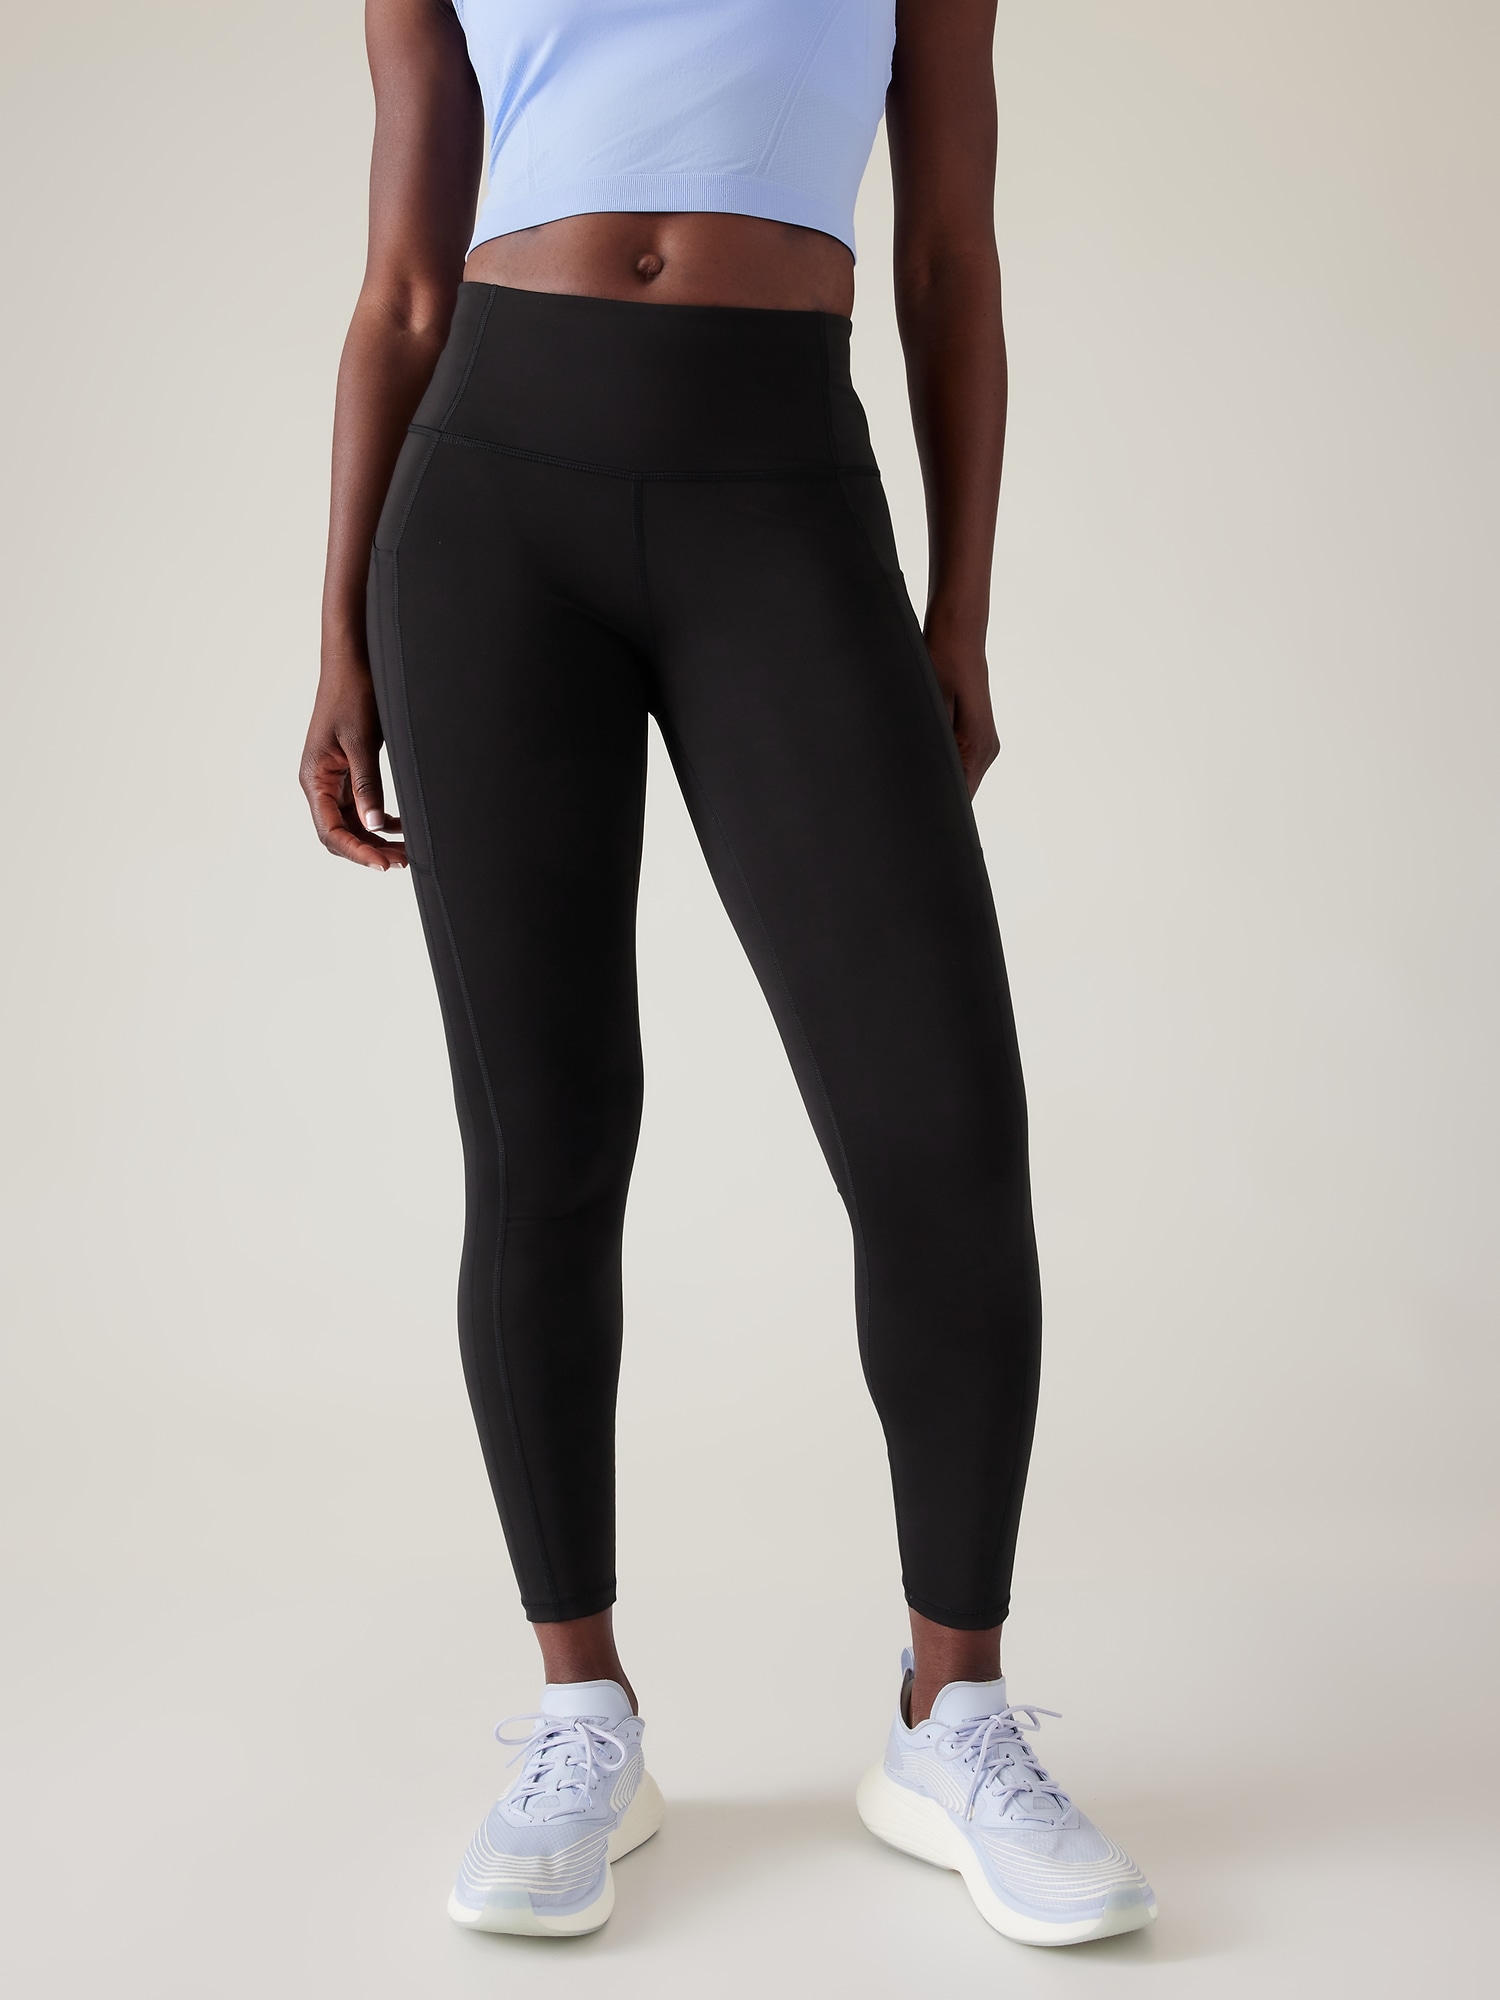 Top more than 129 compression exercise leggings latest